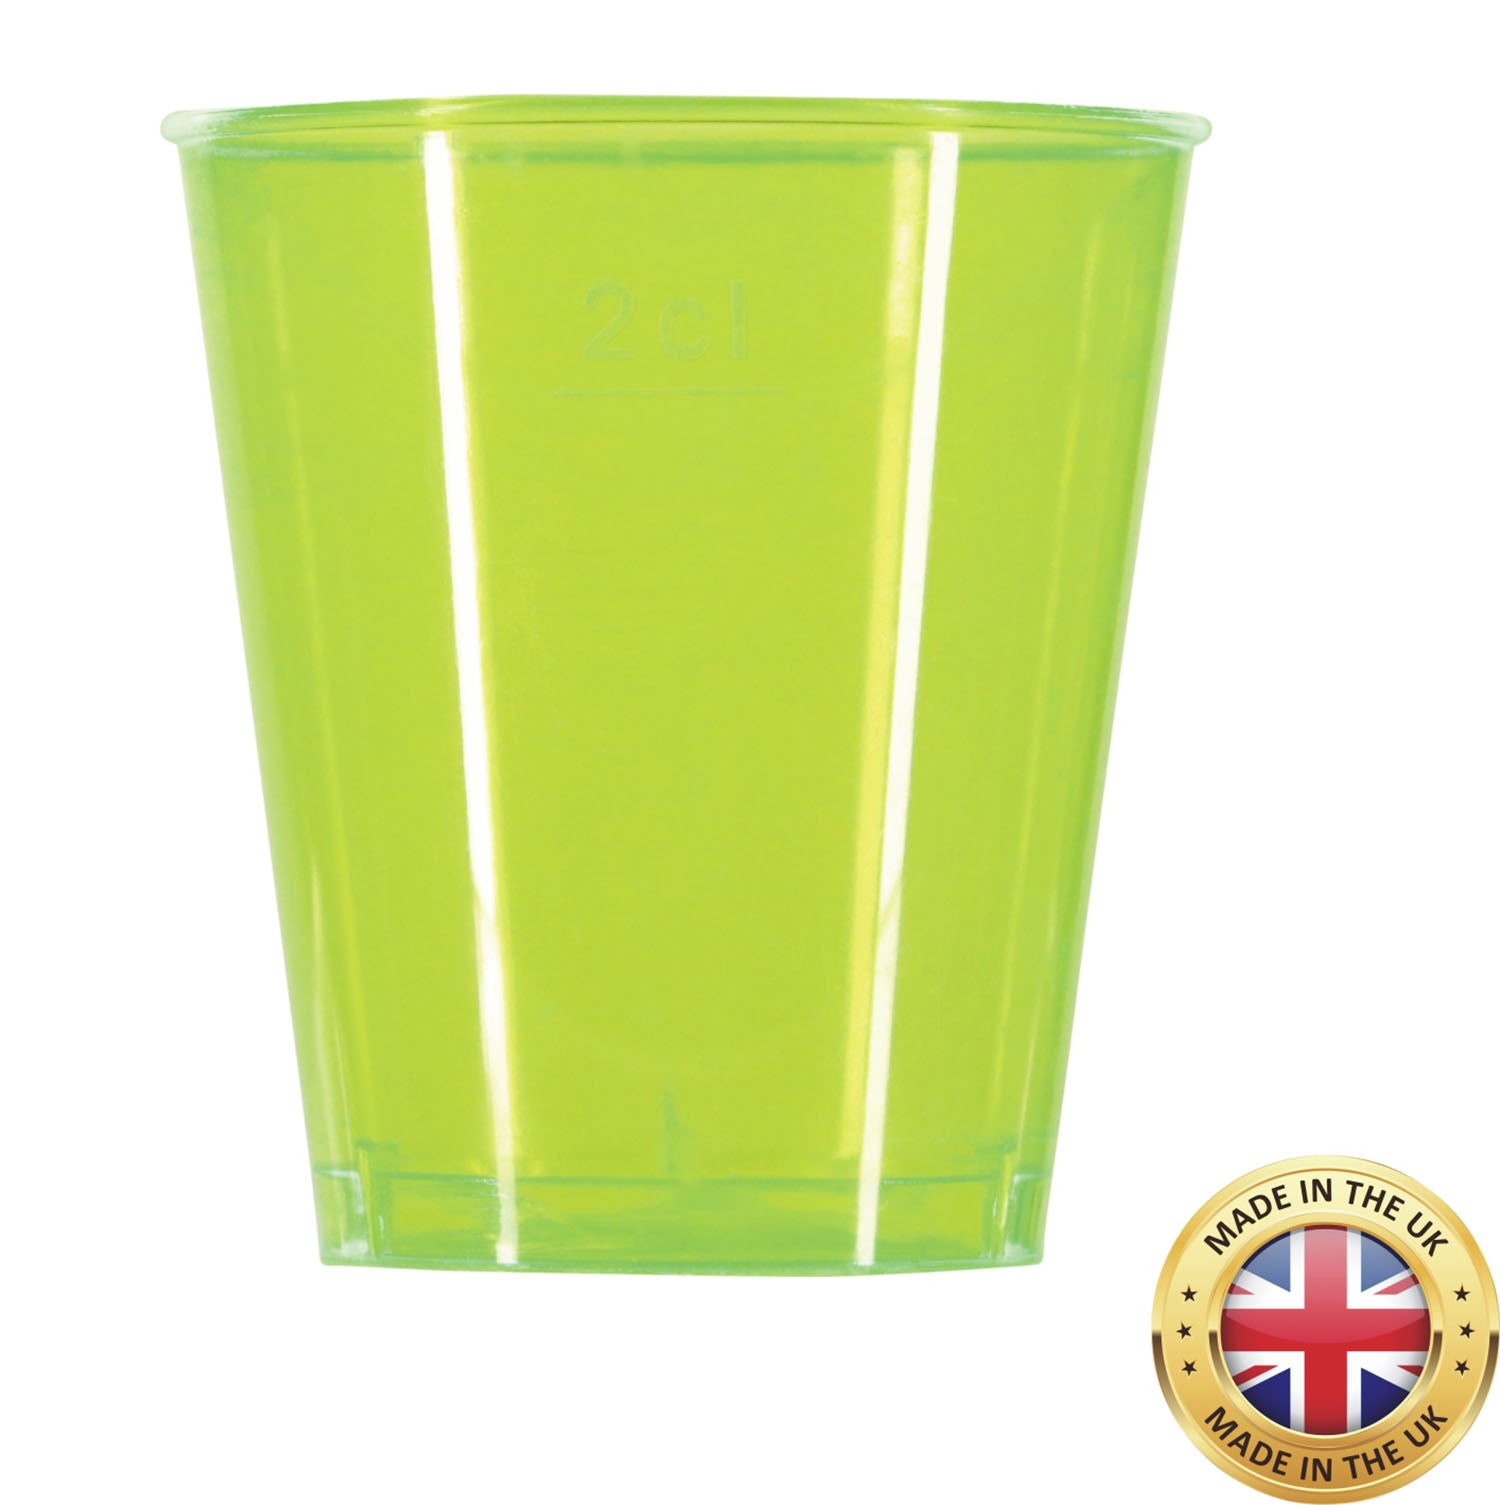 72 x Neon Shot Glasses Plastic Marked 3cl 30ml Bright Colour Jelly Disposable-5056020100850-PCUP-3CLDIS-x2-Product Pro-30ml, Bright Shot Glasses, Disposable Shot Glasses, Neon, Neon Shot Glasses, Plastic Shot Glasses, Shots